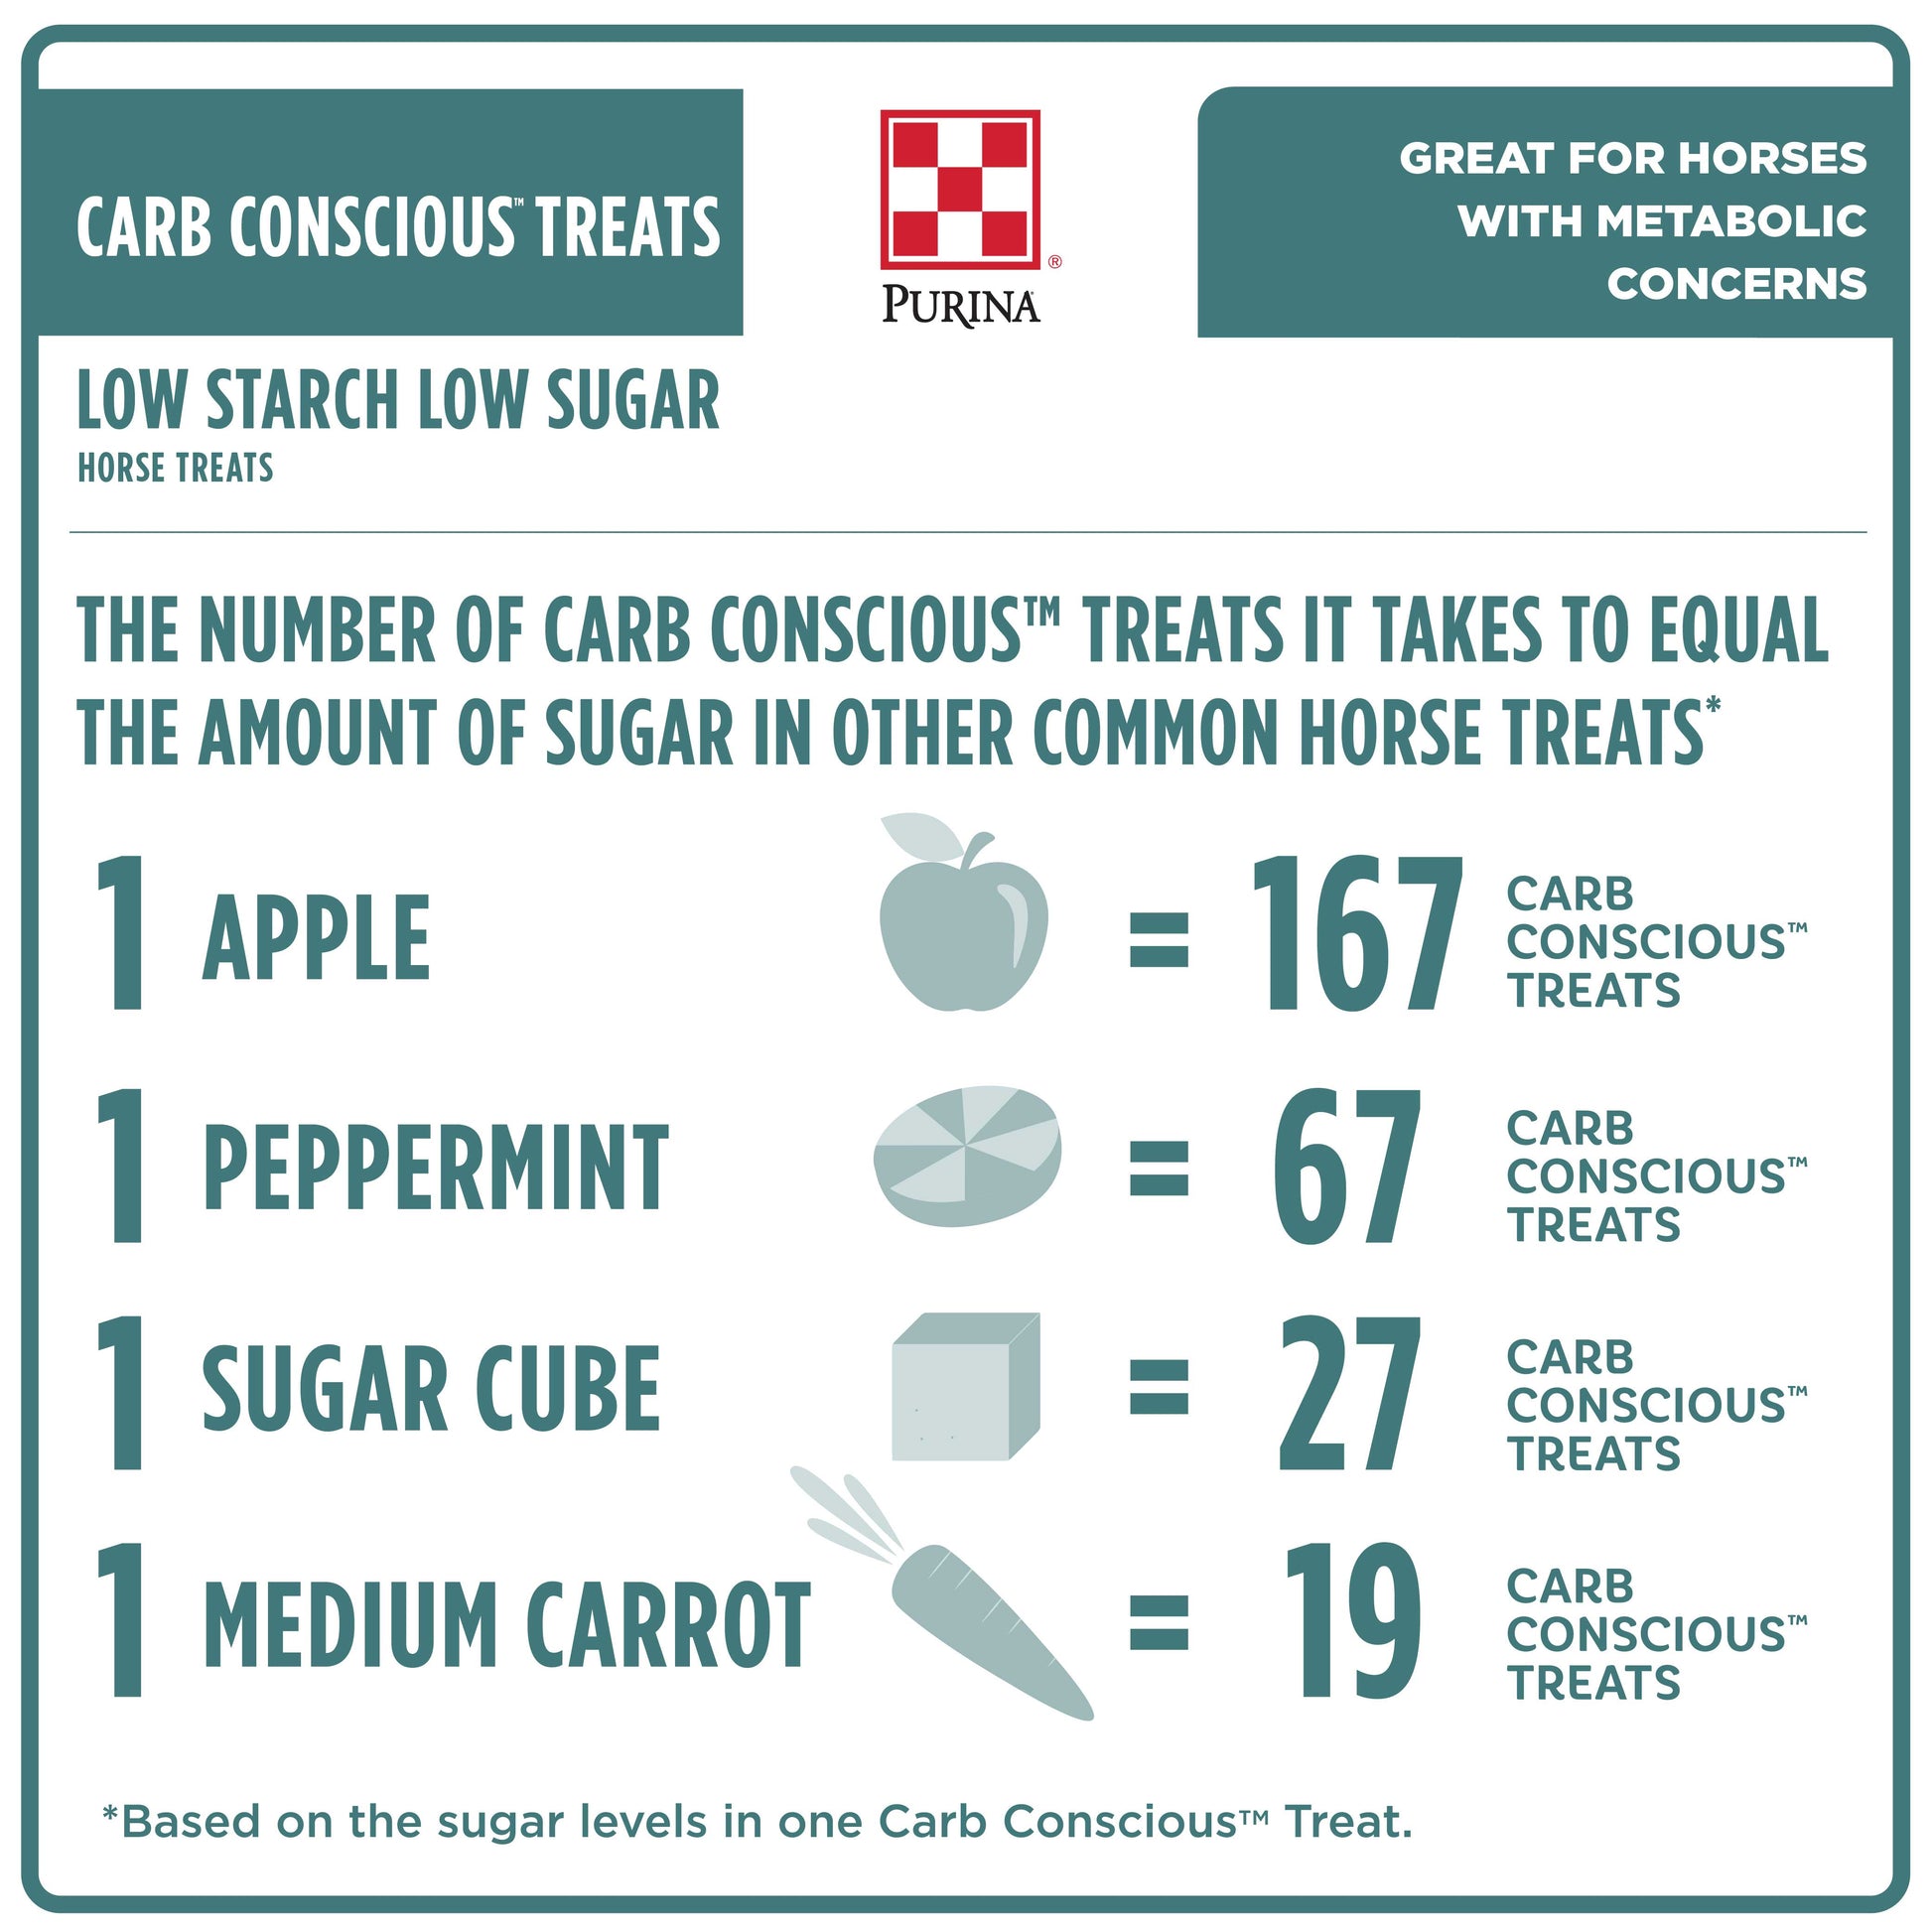 The number of carb conscious treats it takes to equal the amount of sugar in other common horse treats